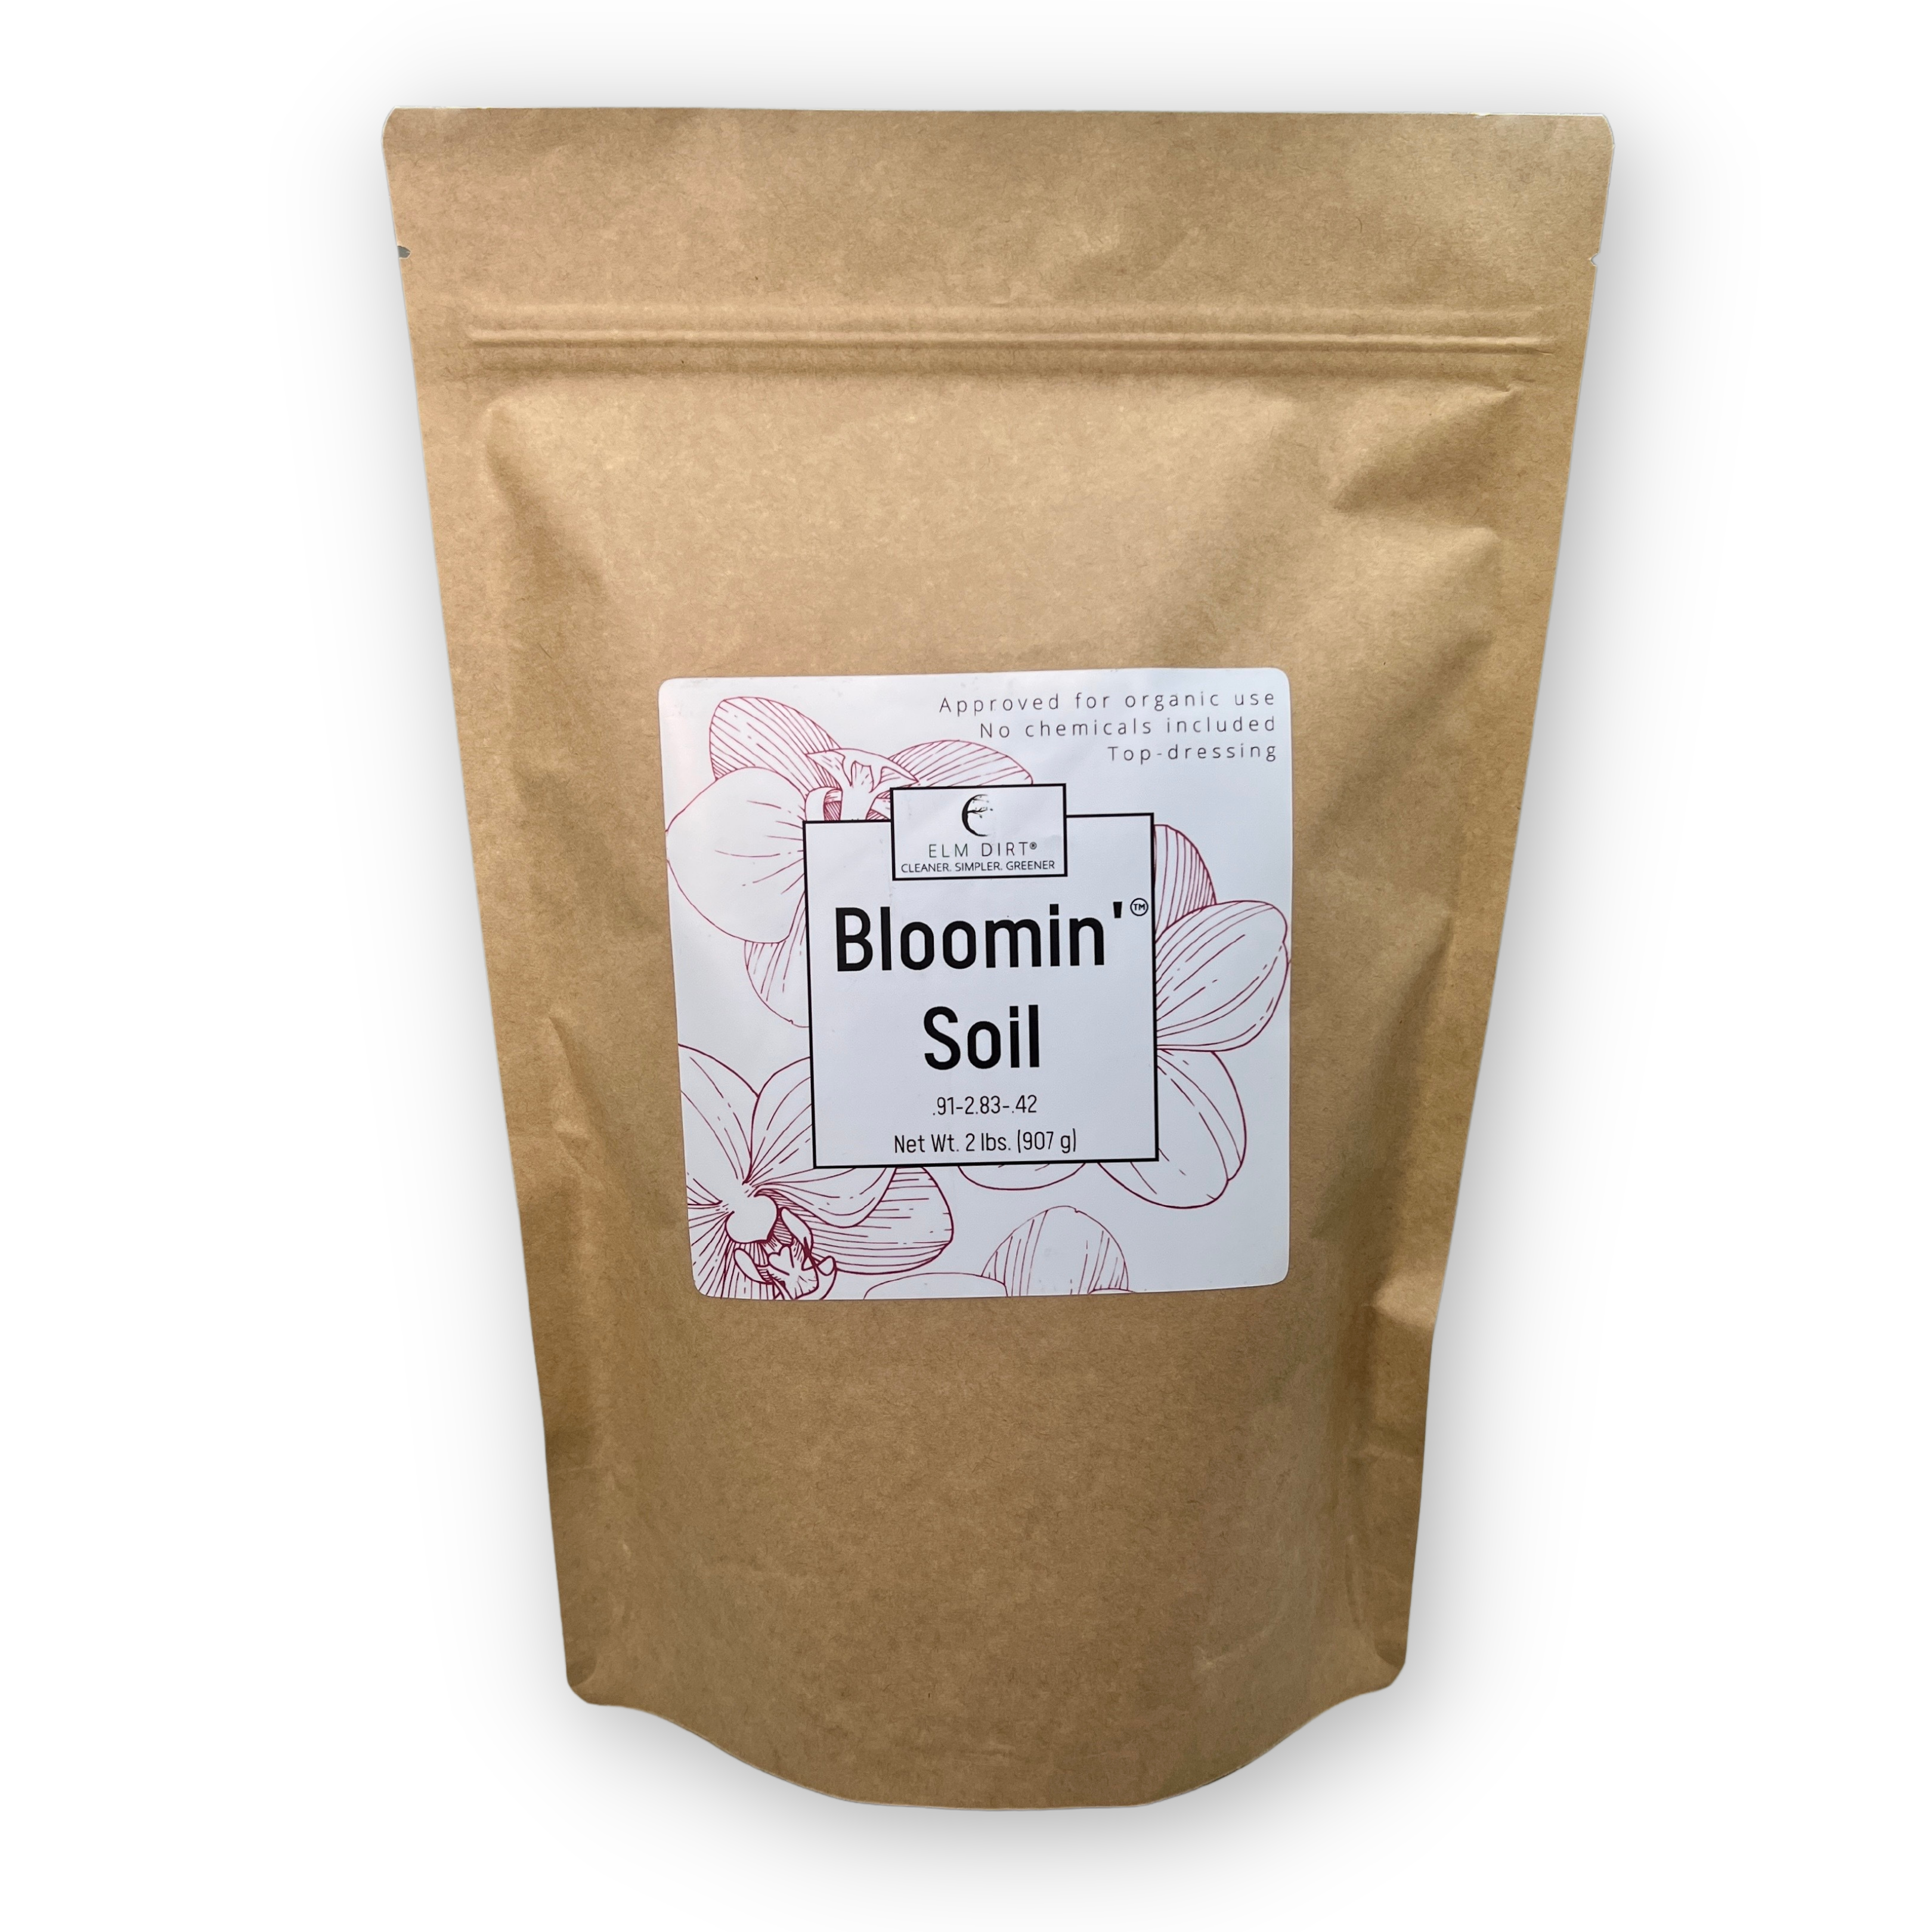 Bloomin' Soil - Natural fertilizer for bigger, longer-lasting blooms! Slow-release nutrients, all-natural ingredients, safe for all plants. Shop now & bring your garden to life!